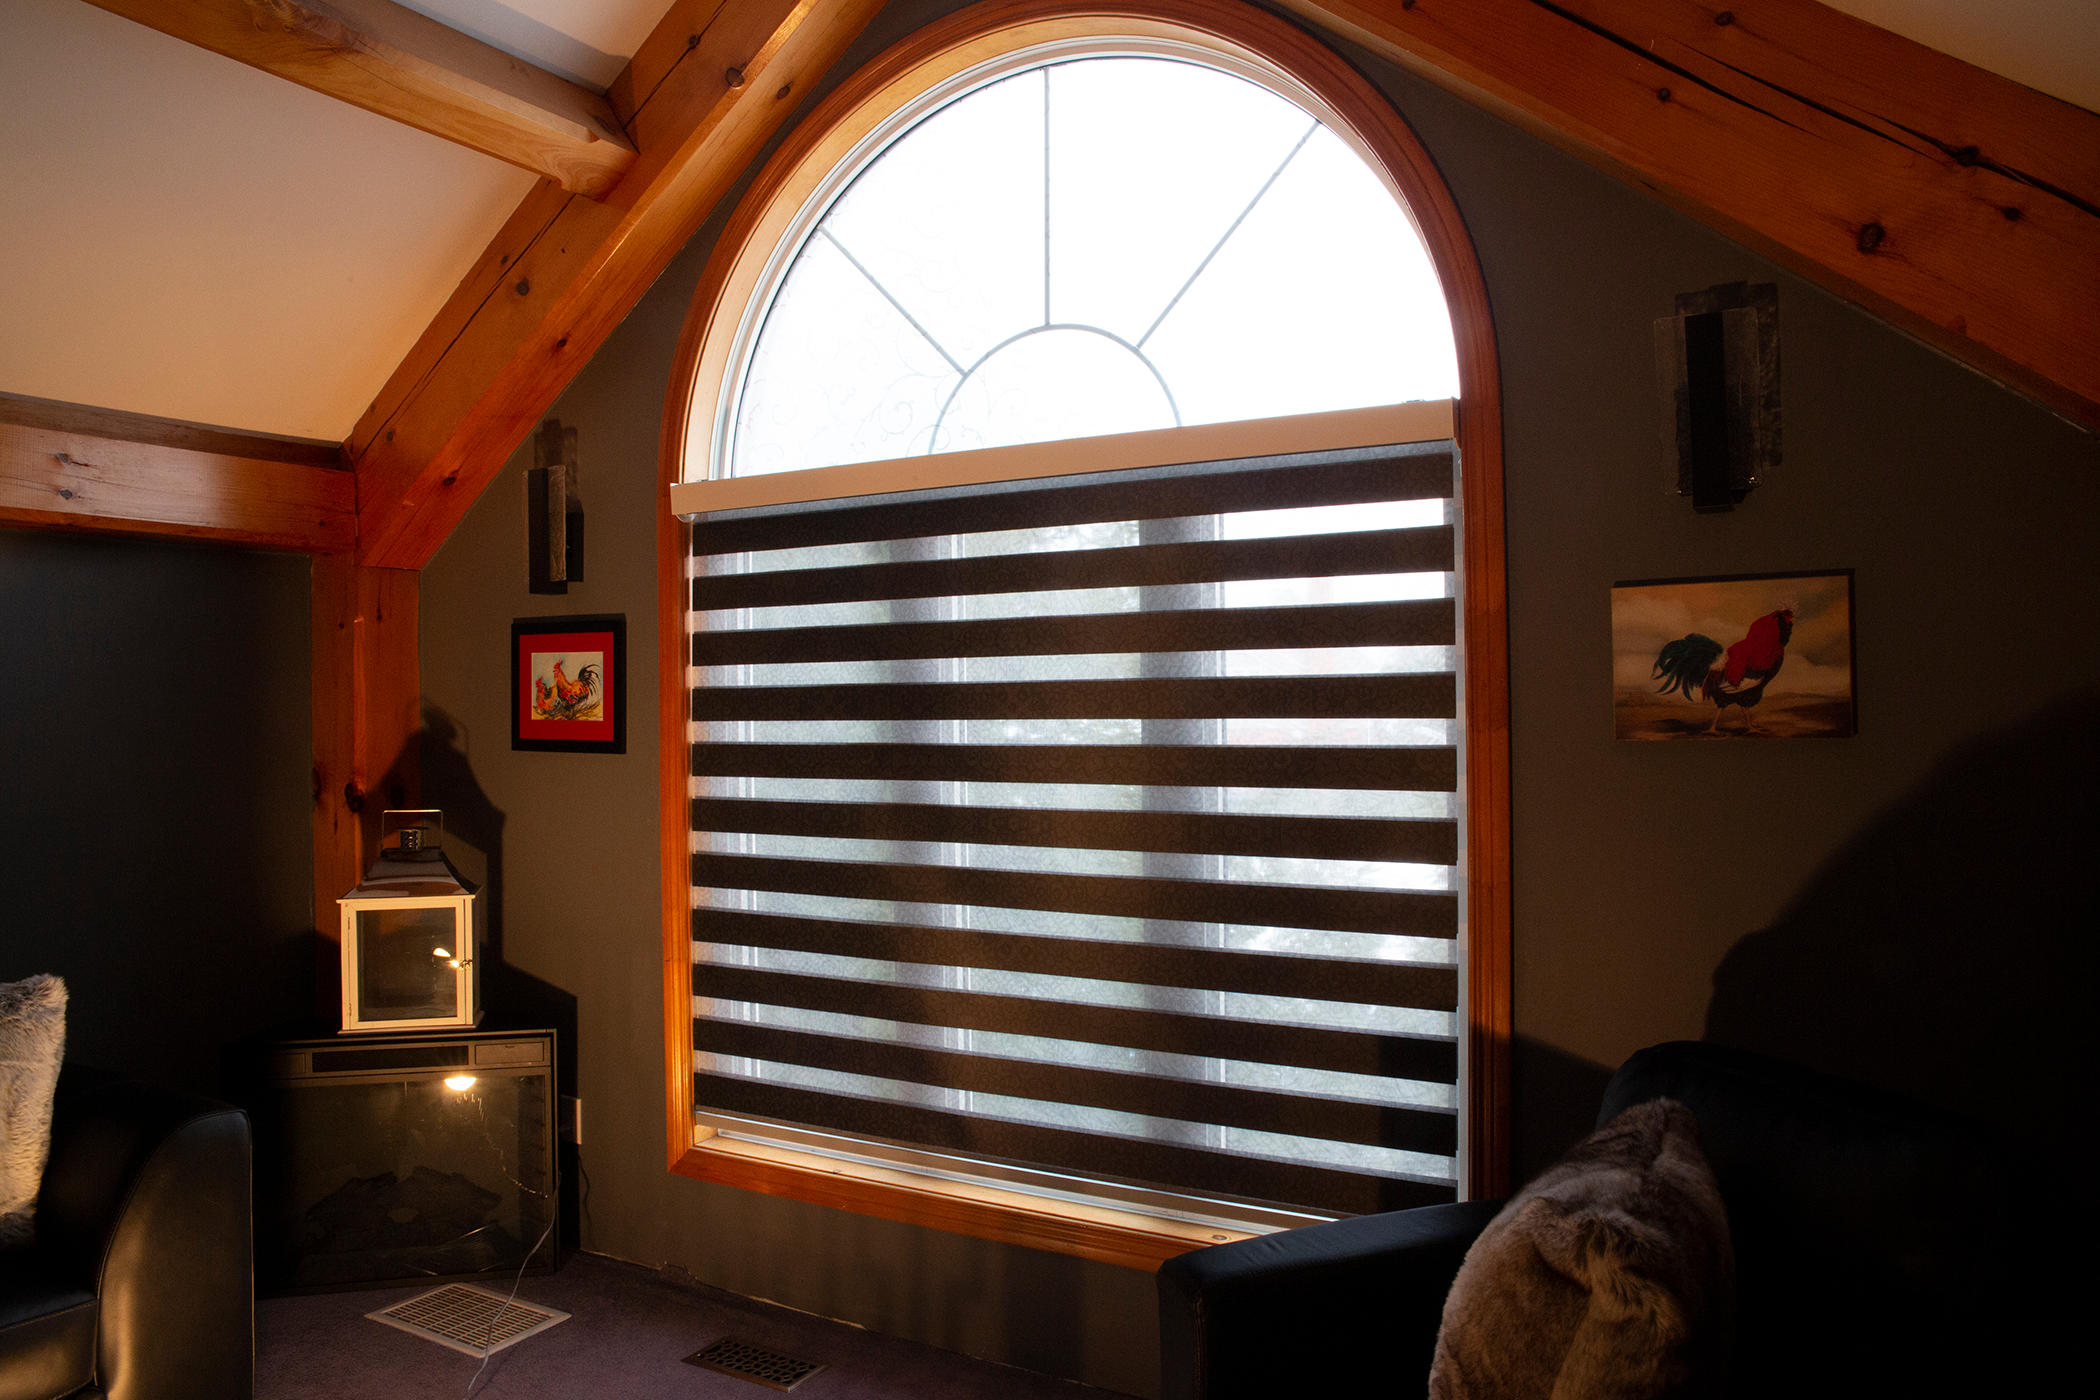 Motorized Dual Shade Budget Blinds of Port Perry Blackstock (905)213-2583